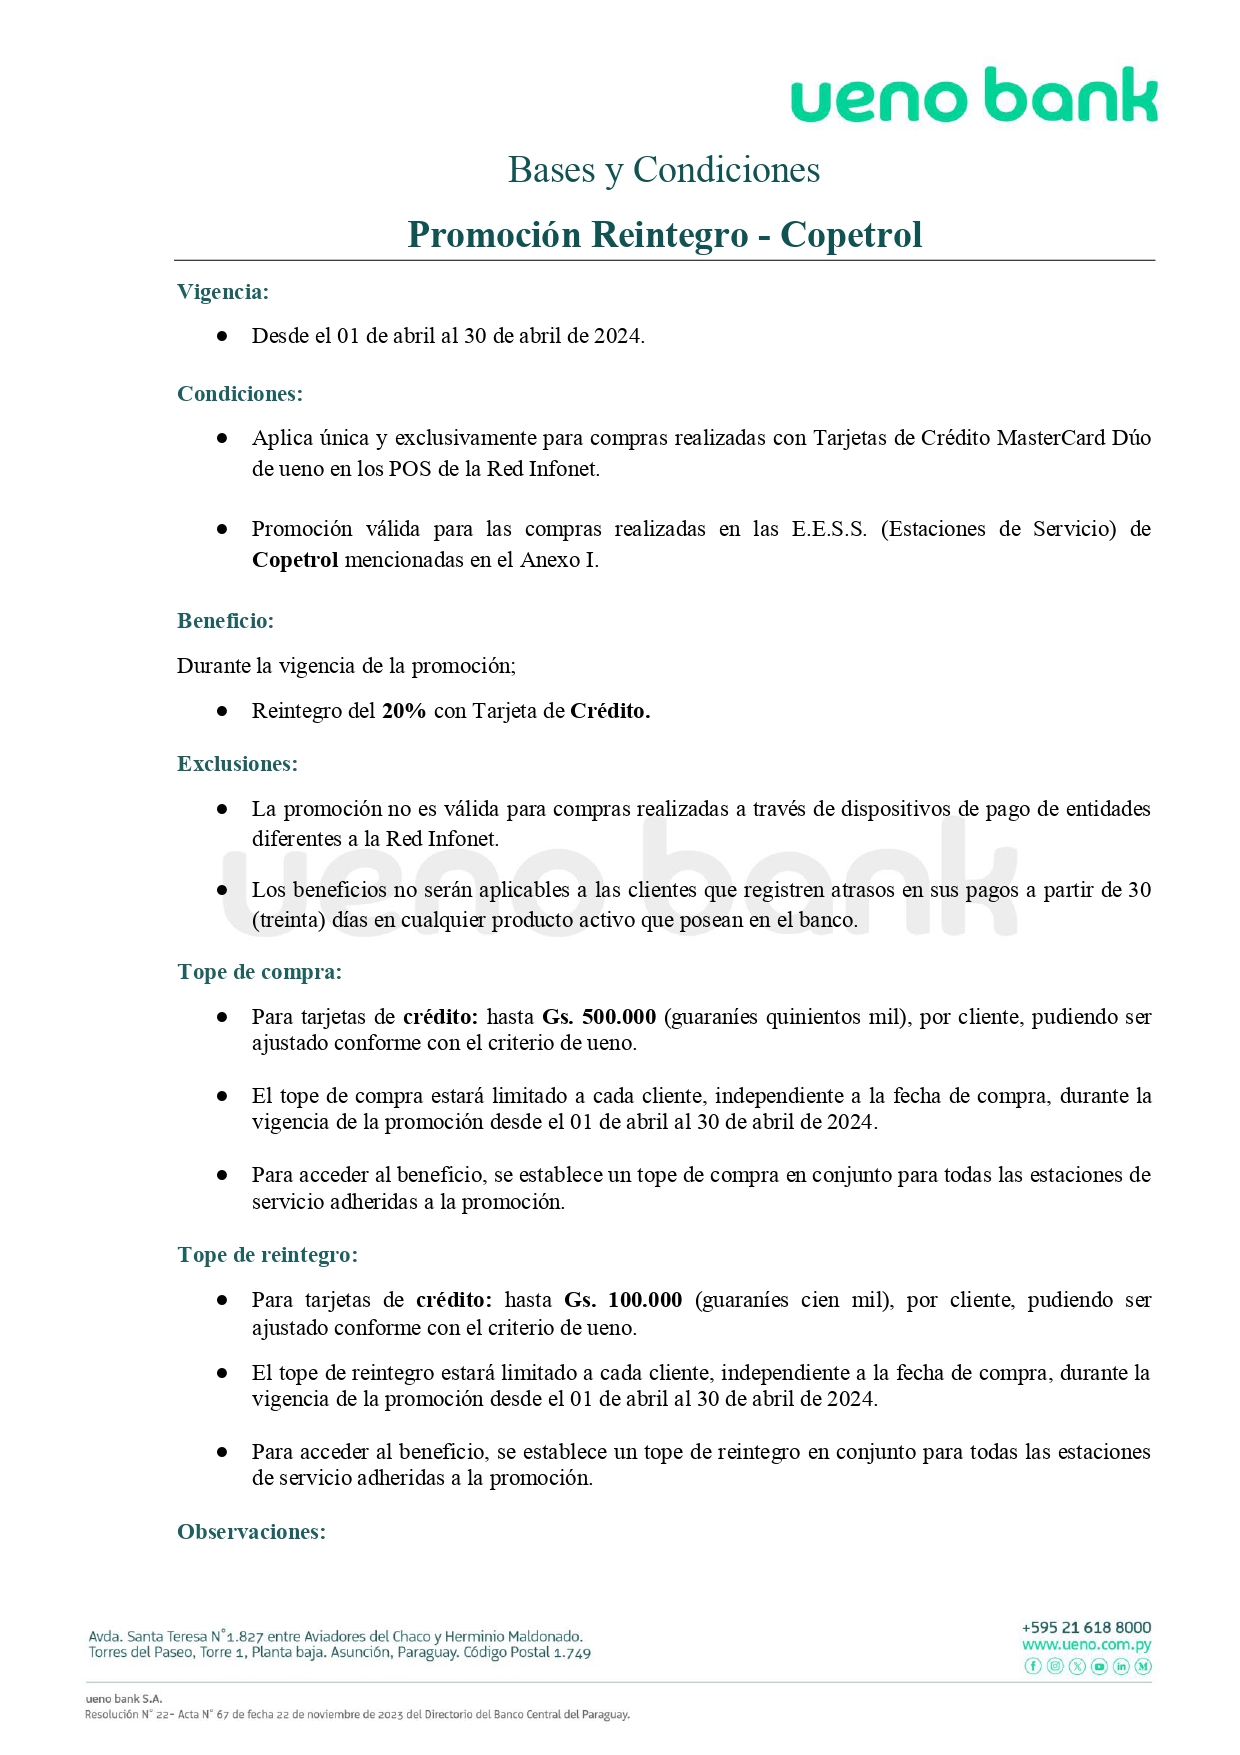 byc copetrol abril (1)_page-0001.jpg